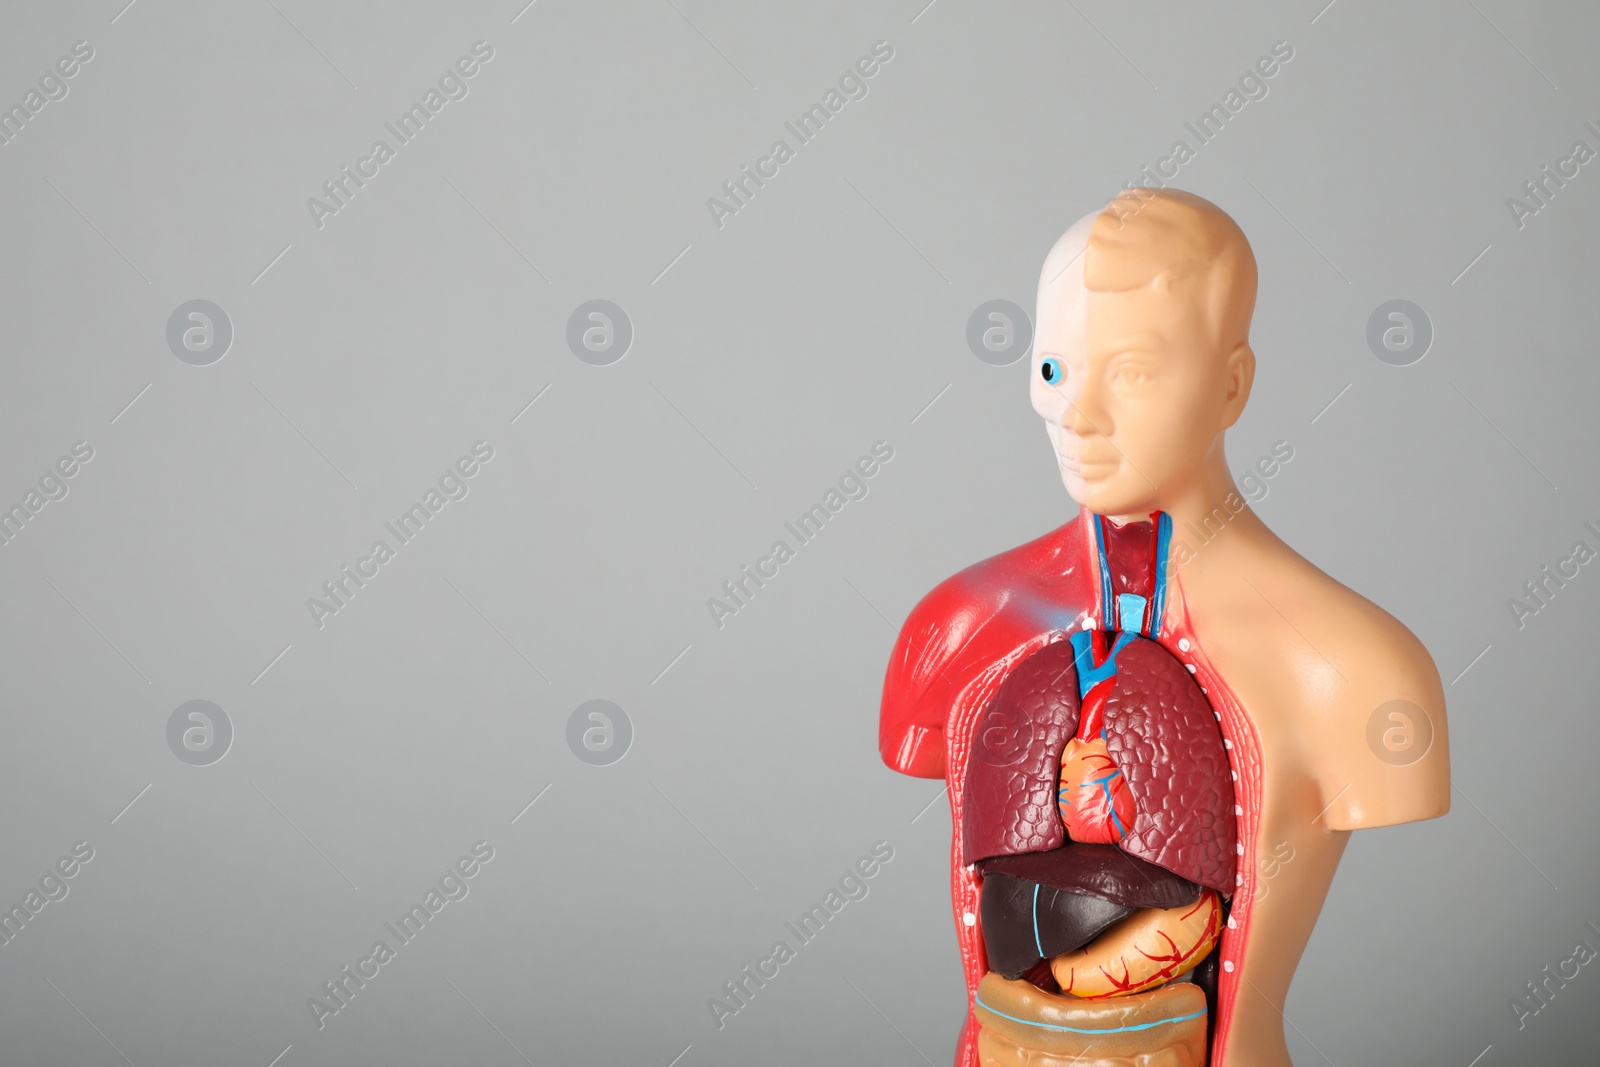 Photo of Human anatomy mannequin showing internal organs on grey background. Space for text